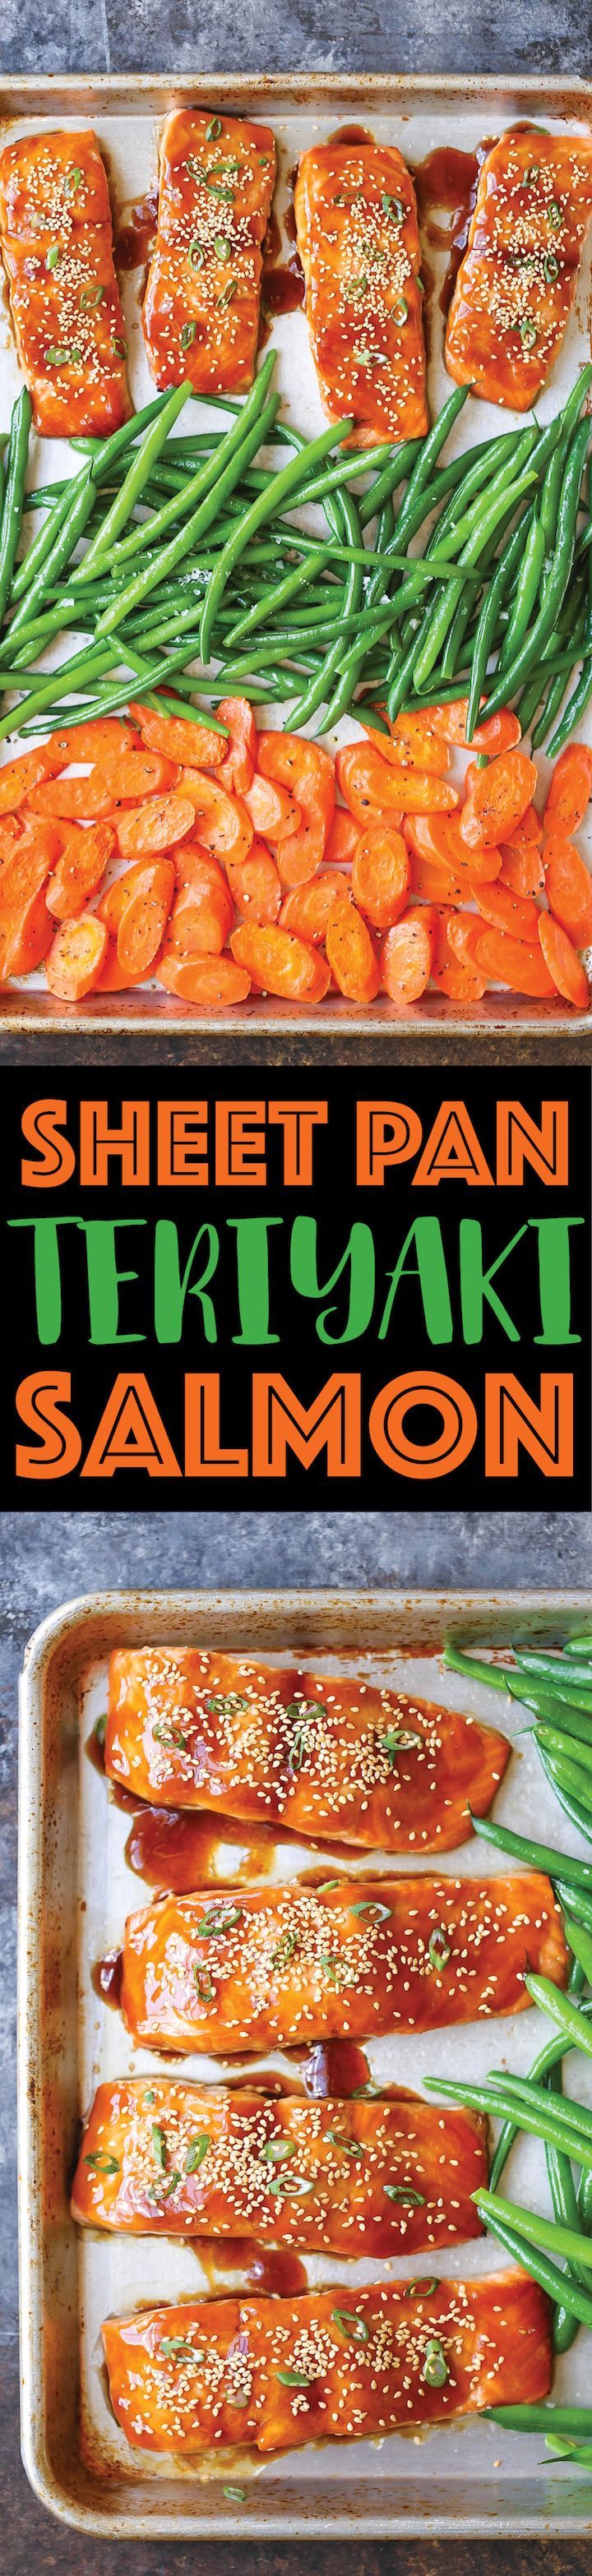 Sheet Pan Teriyaki Salmon – A one pan dinner! Quick. Fast. And so flavorful. With your veggies right alongside your main for the